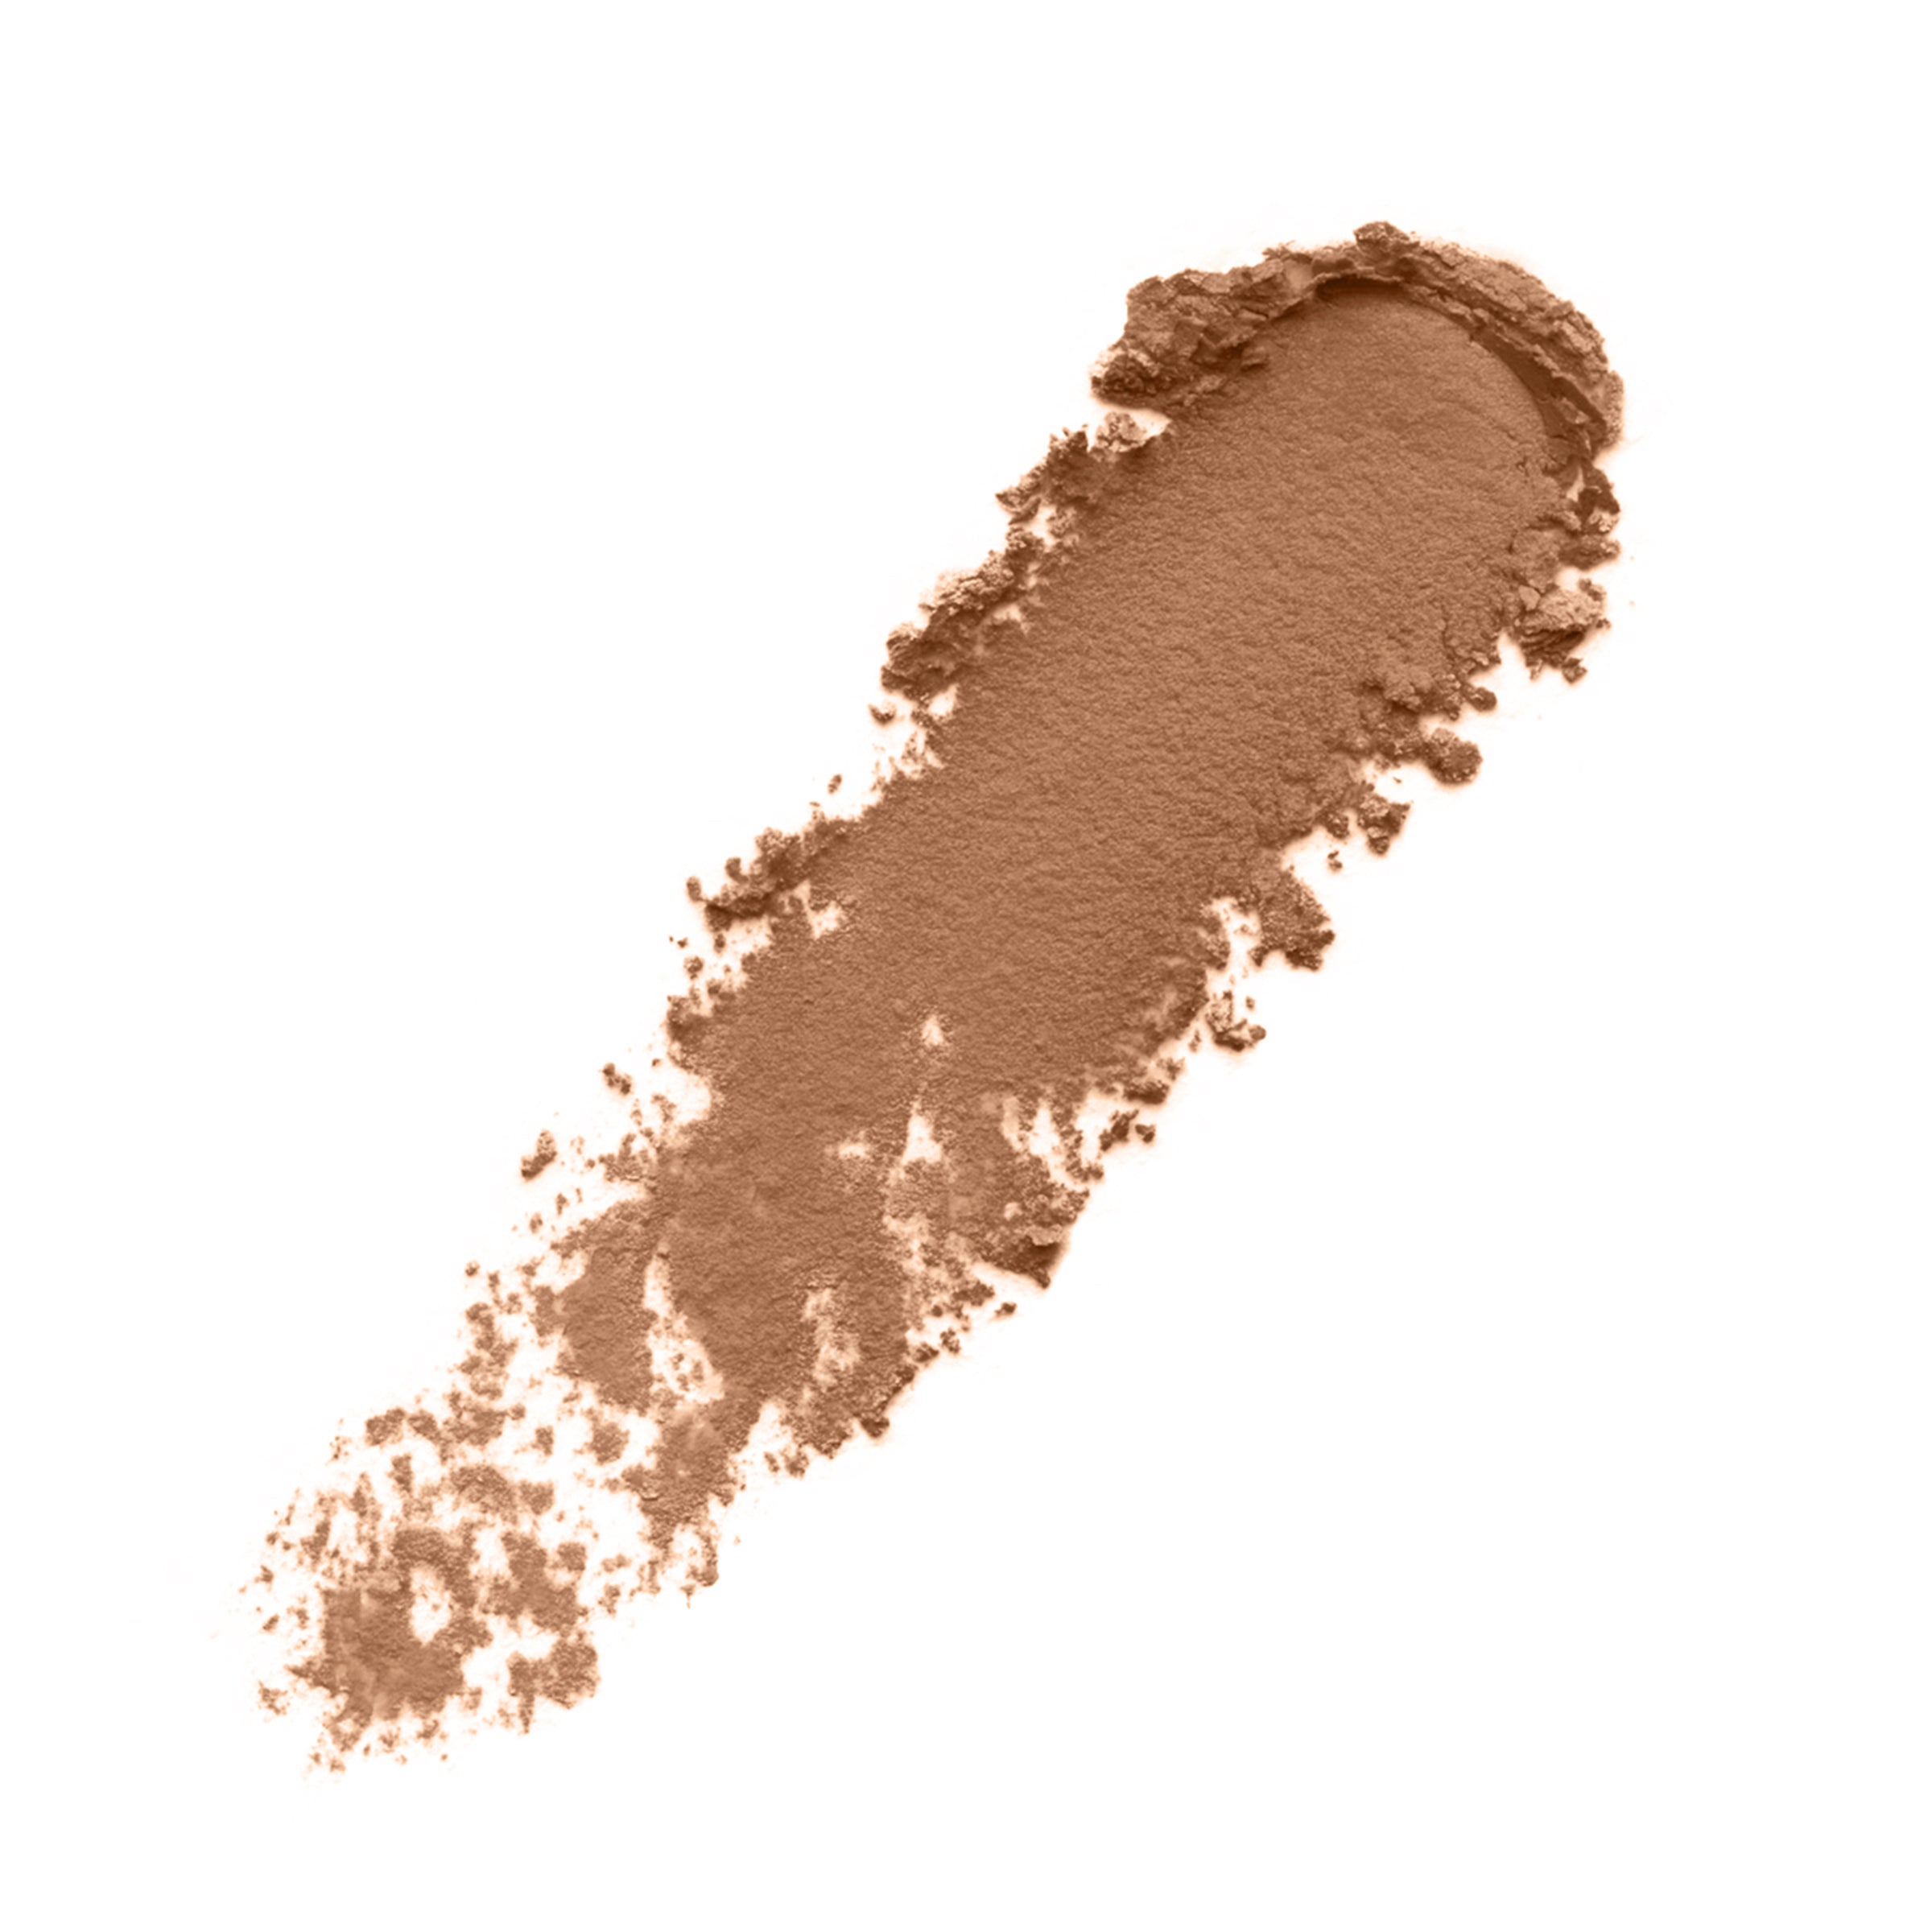 SOLEIL DOUX - NEUTRAL UNDERTONE - bronzer swatch for light to medium complexions and neutral undertones in a satin finish